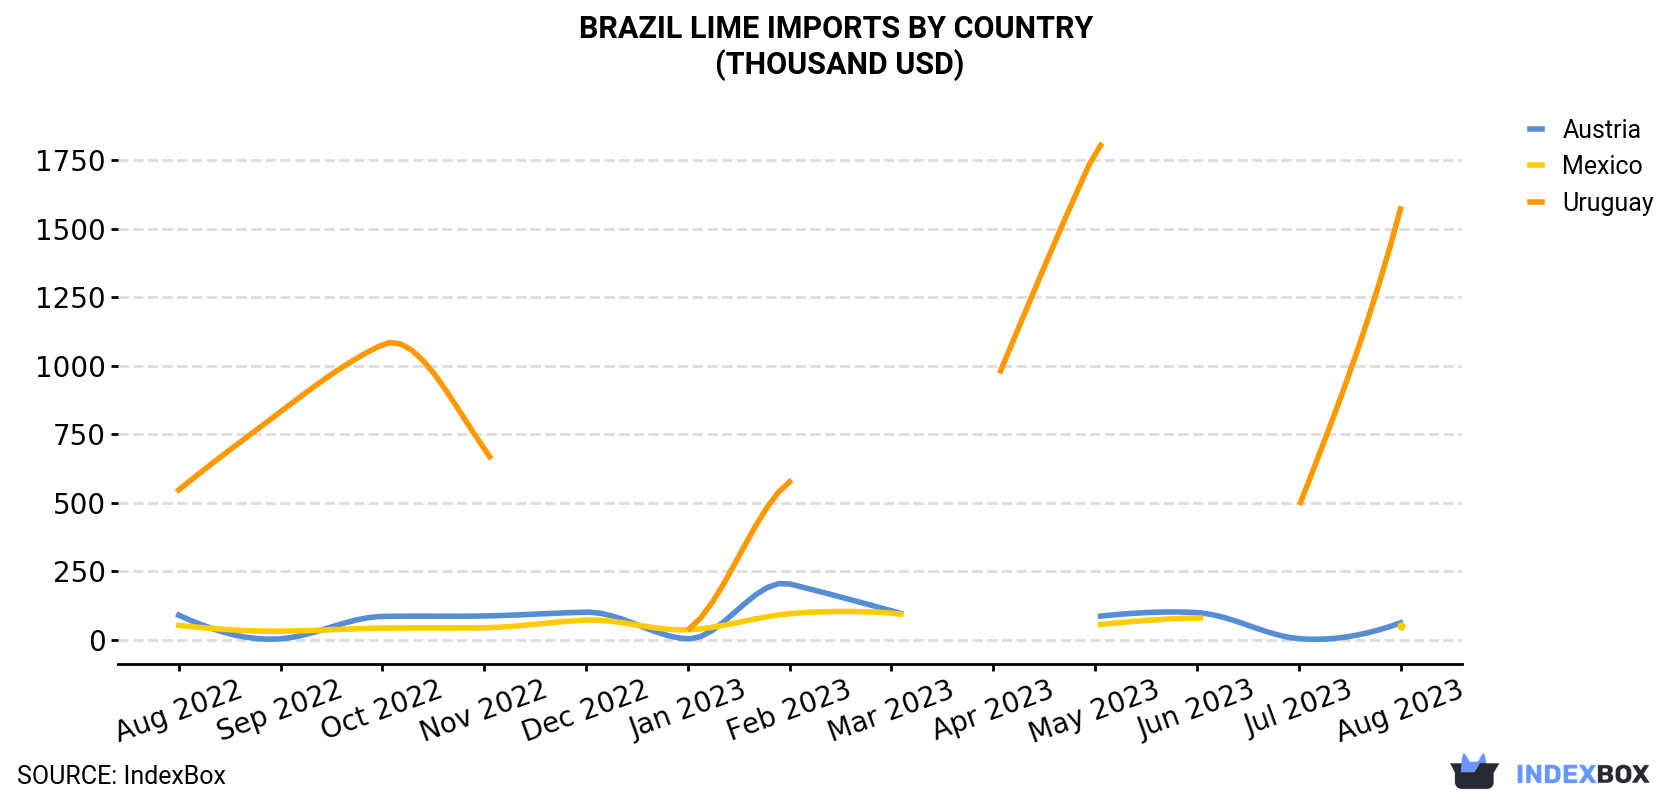 Brazil Lime Imports By Country (Thousand USD)